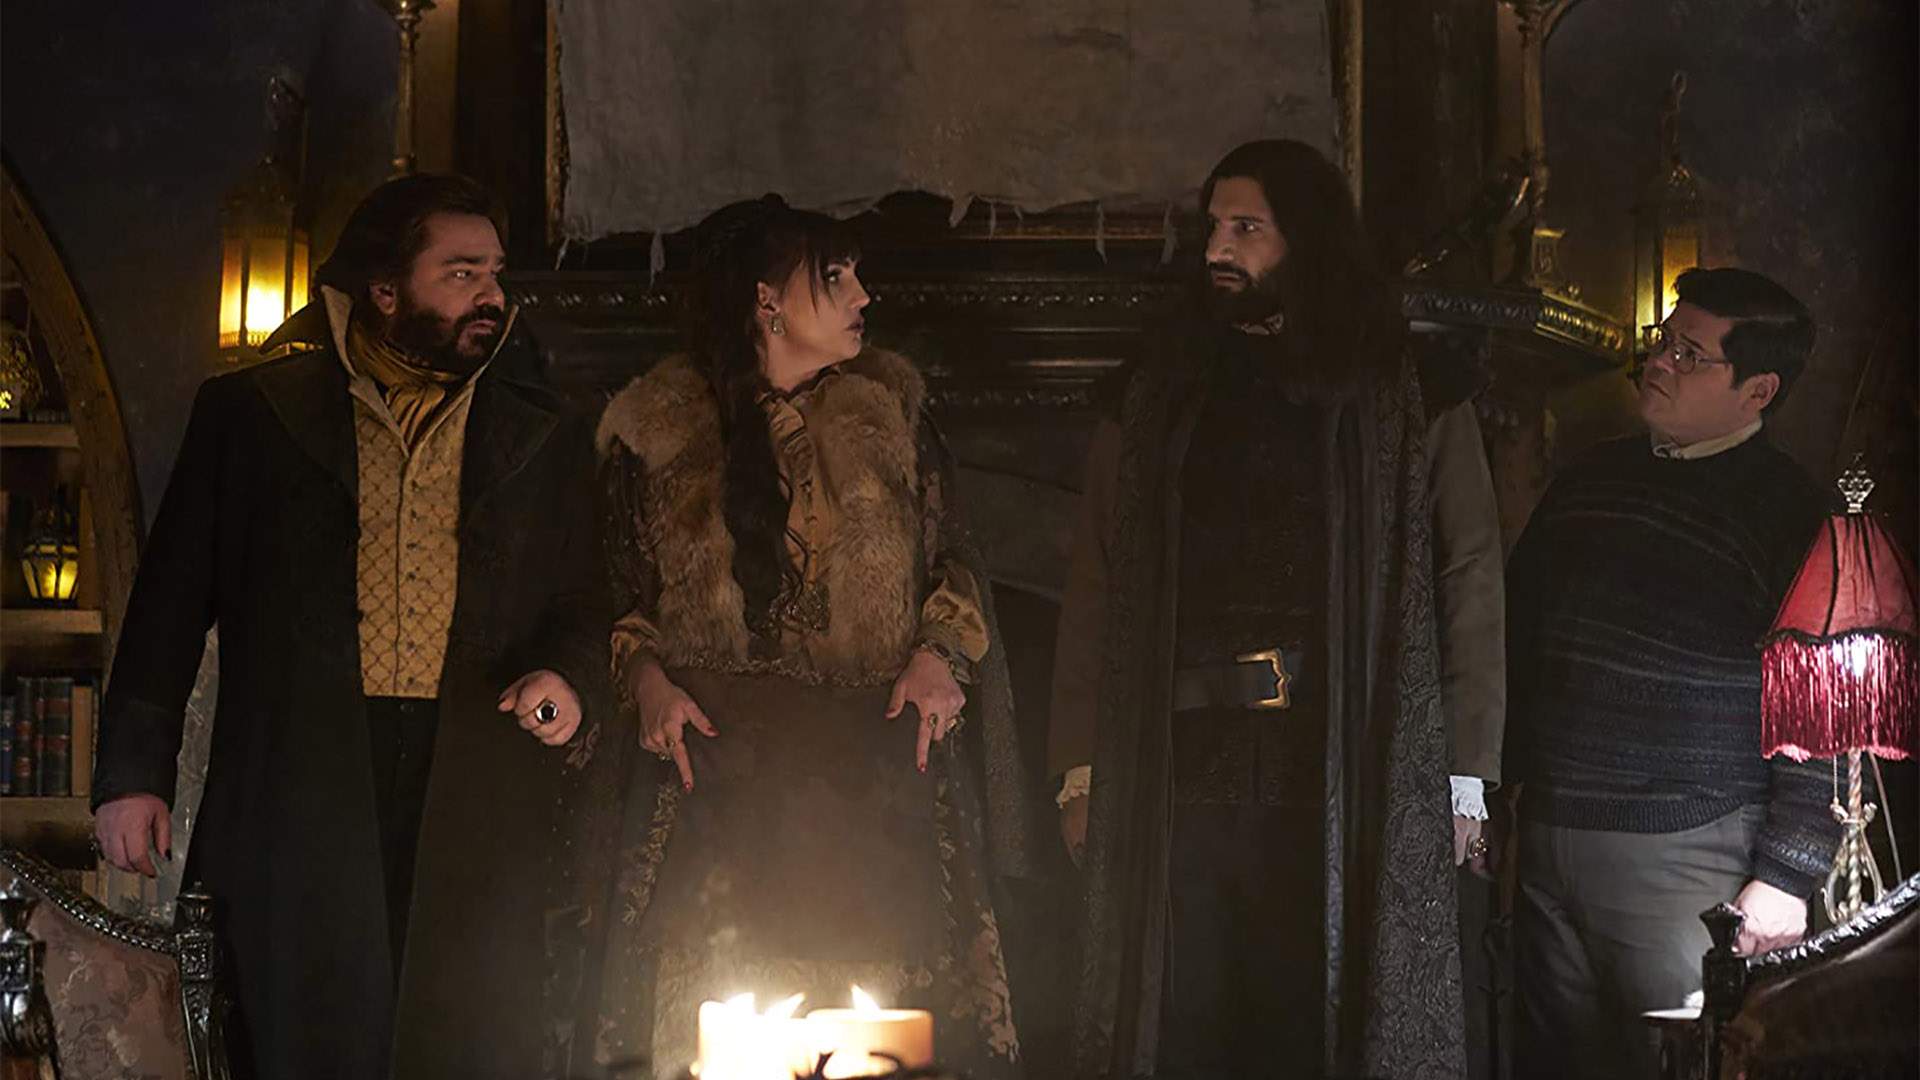 The Trailer for 'What We Do in the Shadows' Season Three Sinks Its Teeth Into Several Power Struggles